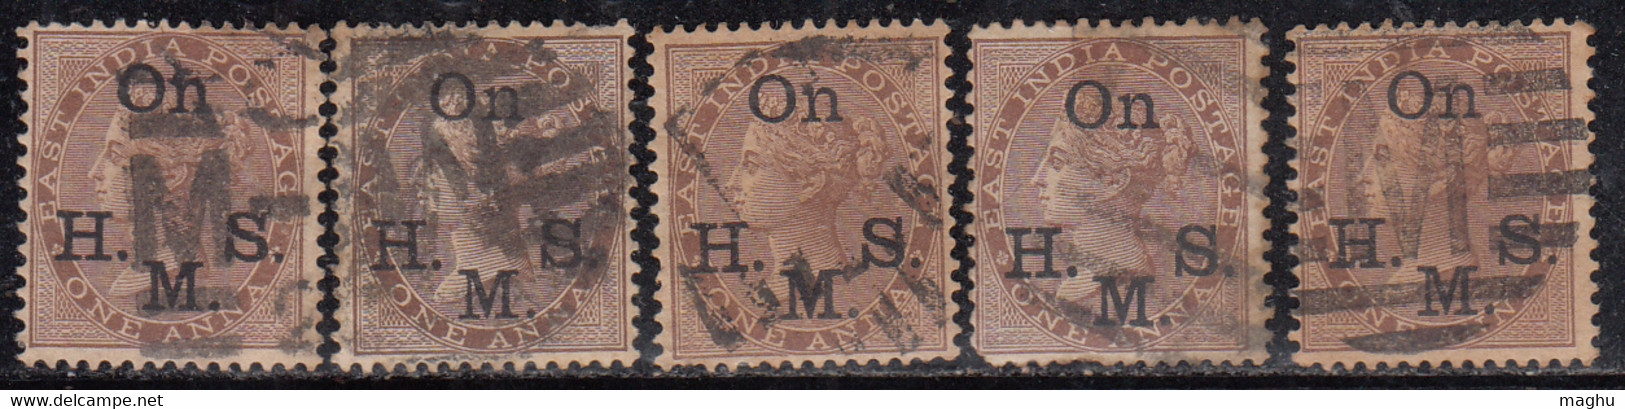 1a X 5 Diff., Shades Varities, British East India Used On H.M.S. Service, 1874, One Anna, Official. - 1854 Britische Indien-Kompanie